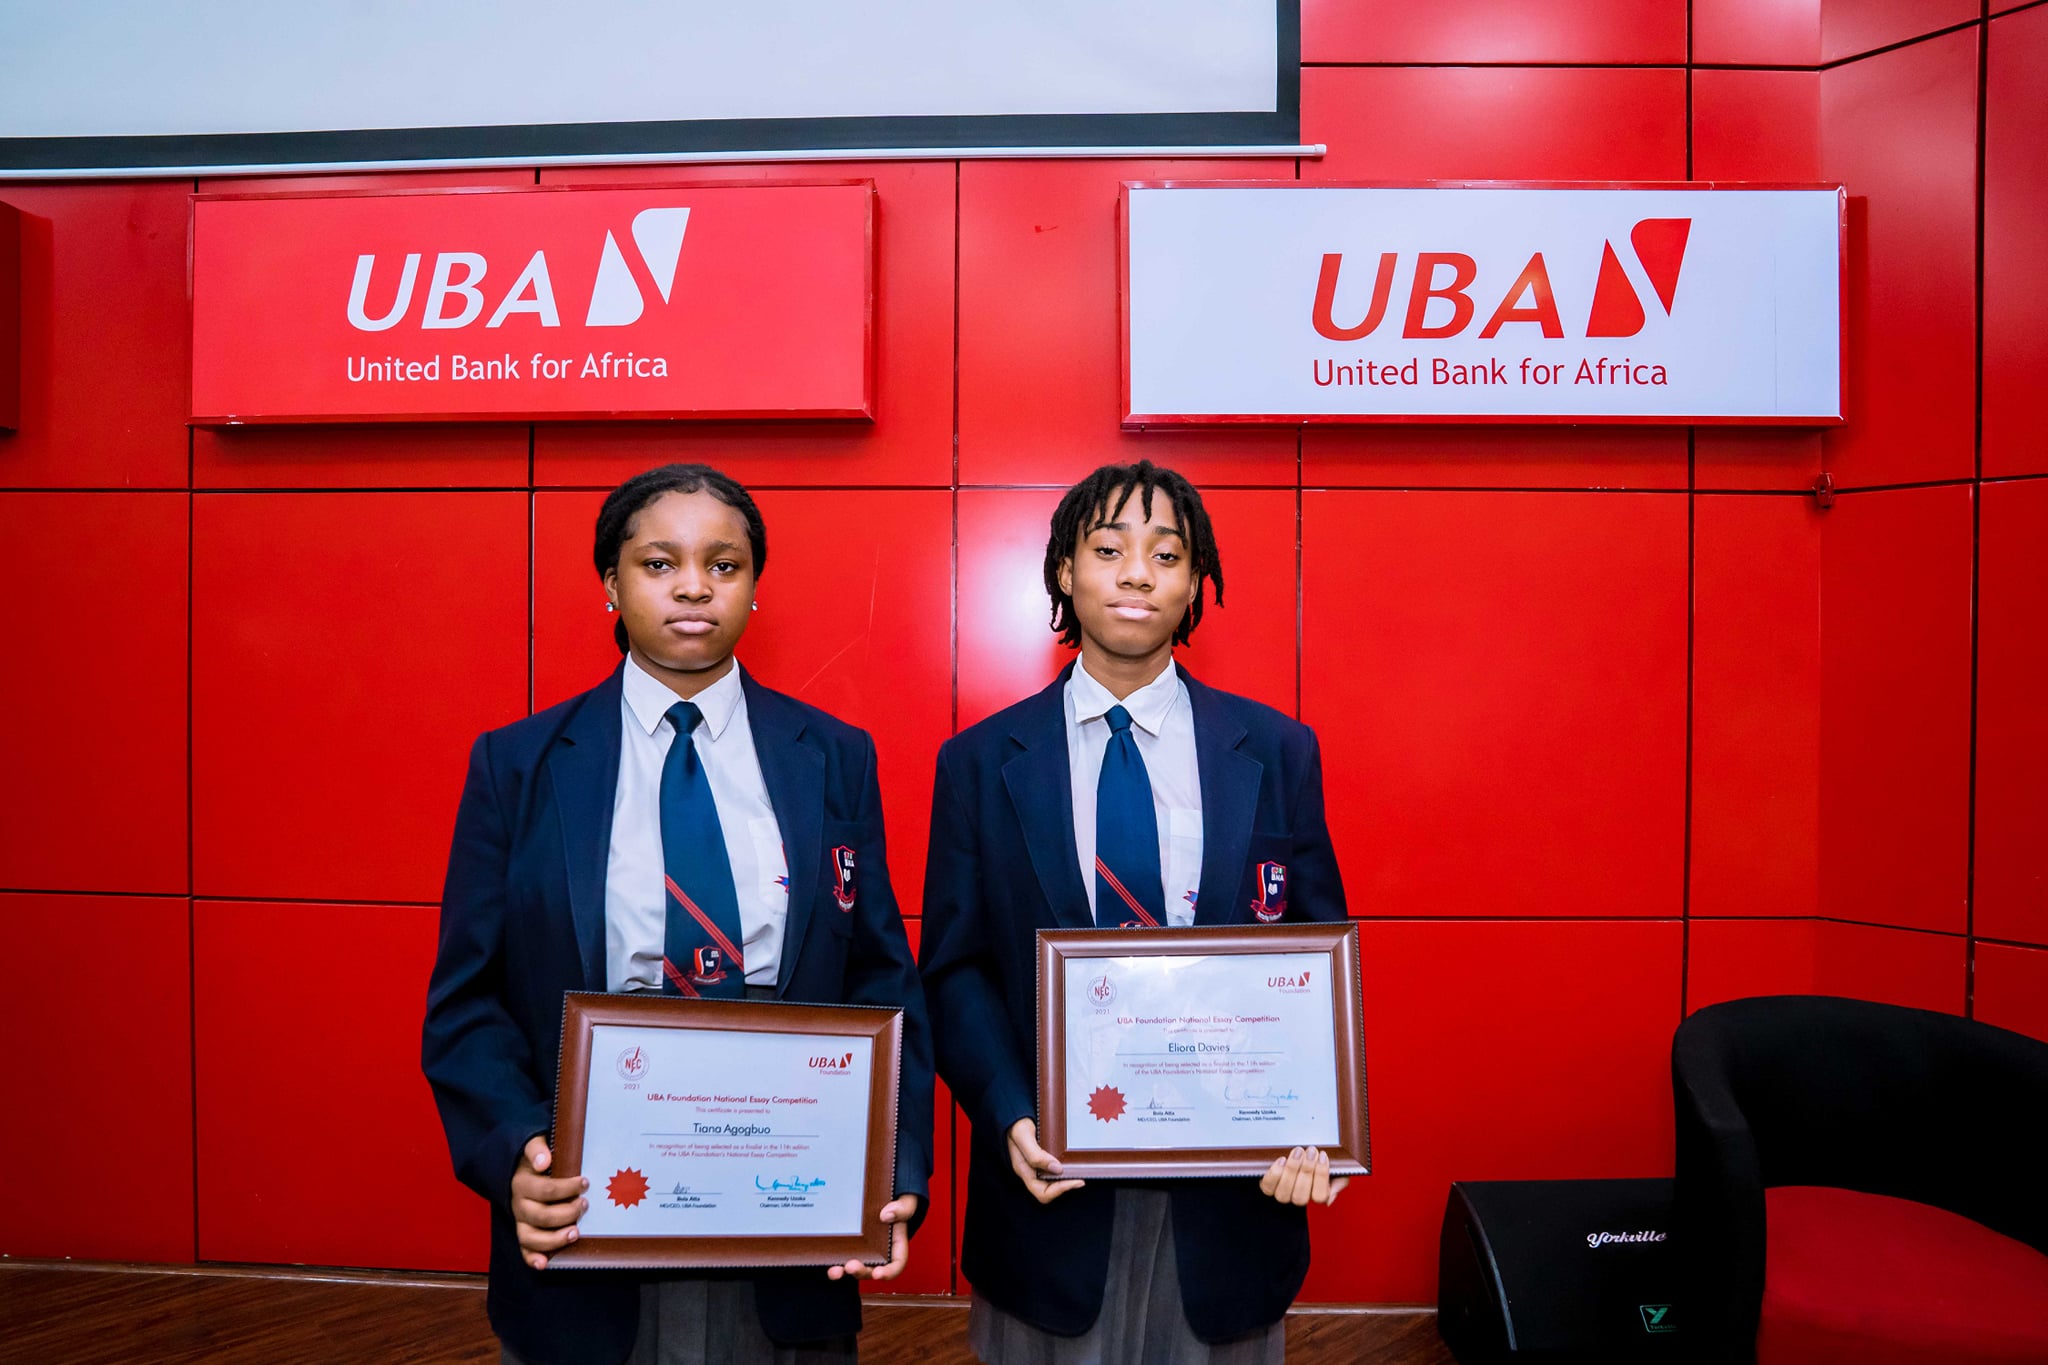 uba essay competition 2021 results